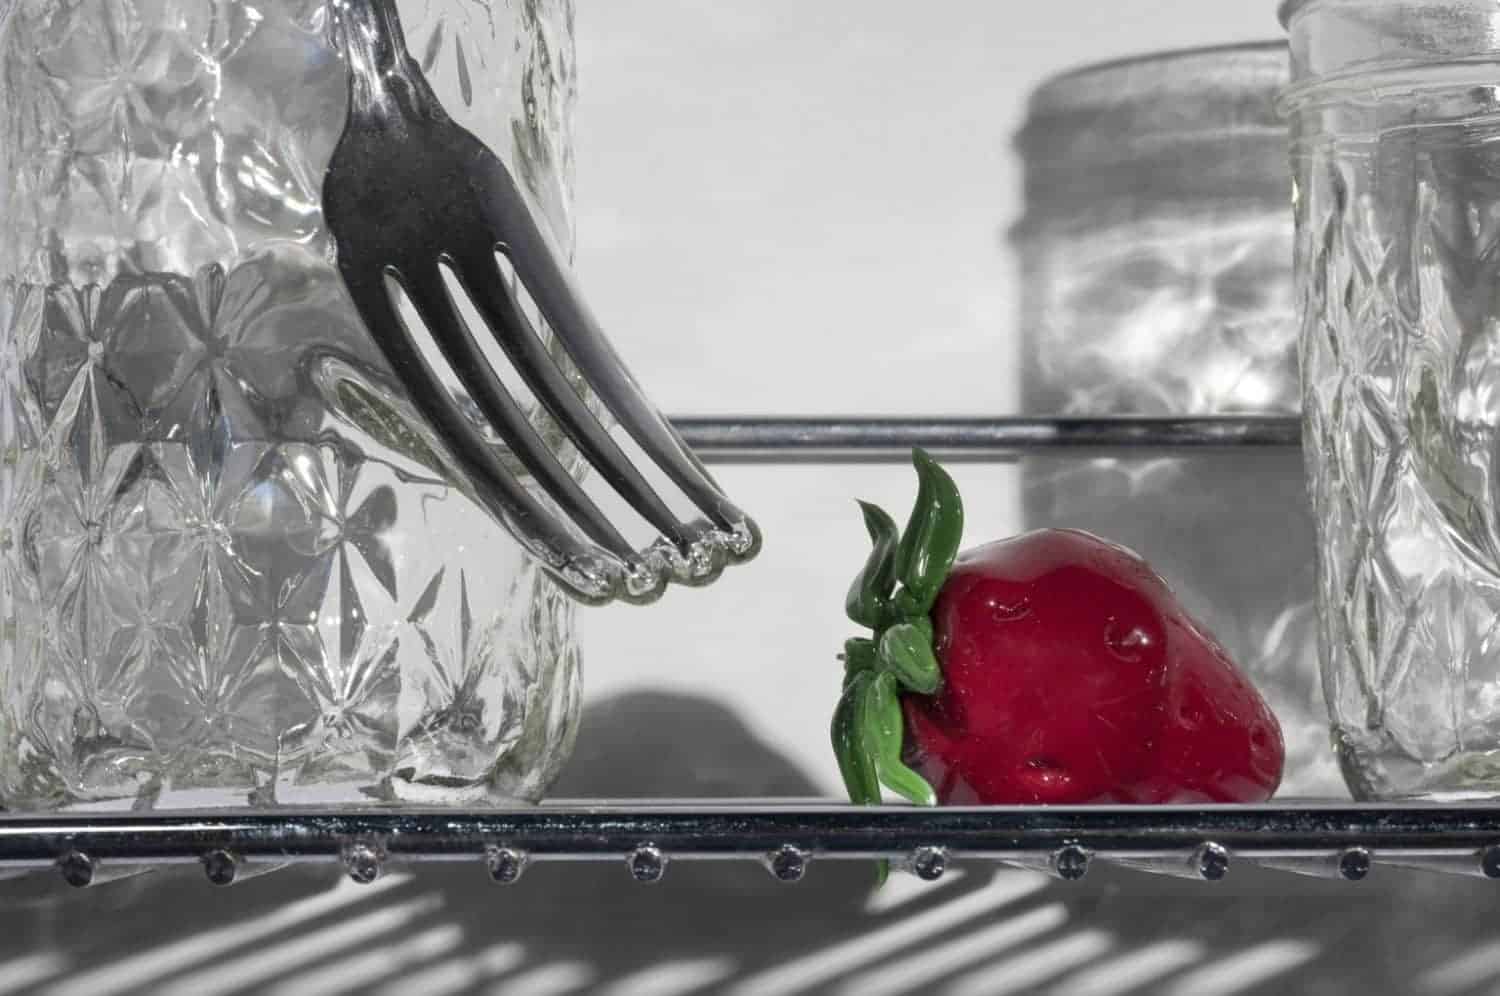 Detail of “From small beginnings come great things,” Jelly jars, cutlery, flame worked glass, stainless steel, 12 x 16 x 6 inches, photo credit: Elizabeth Torgerson-Lamark